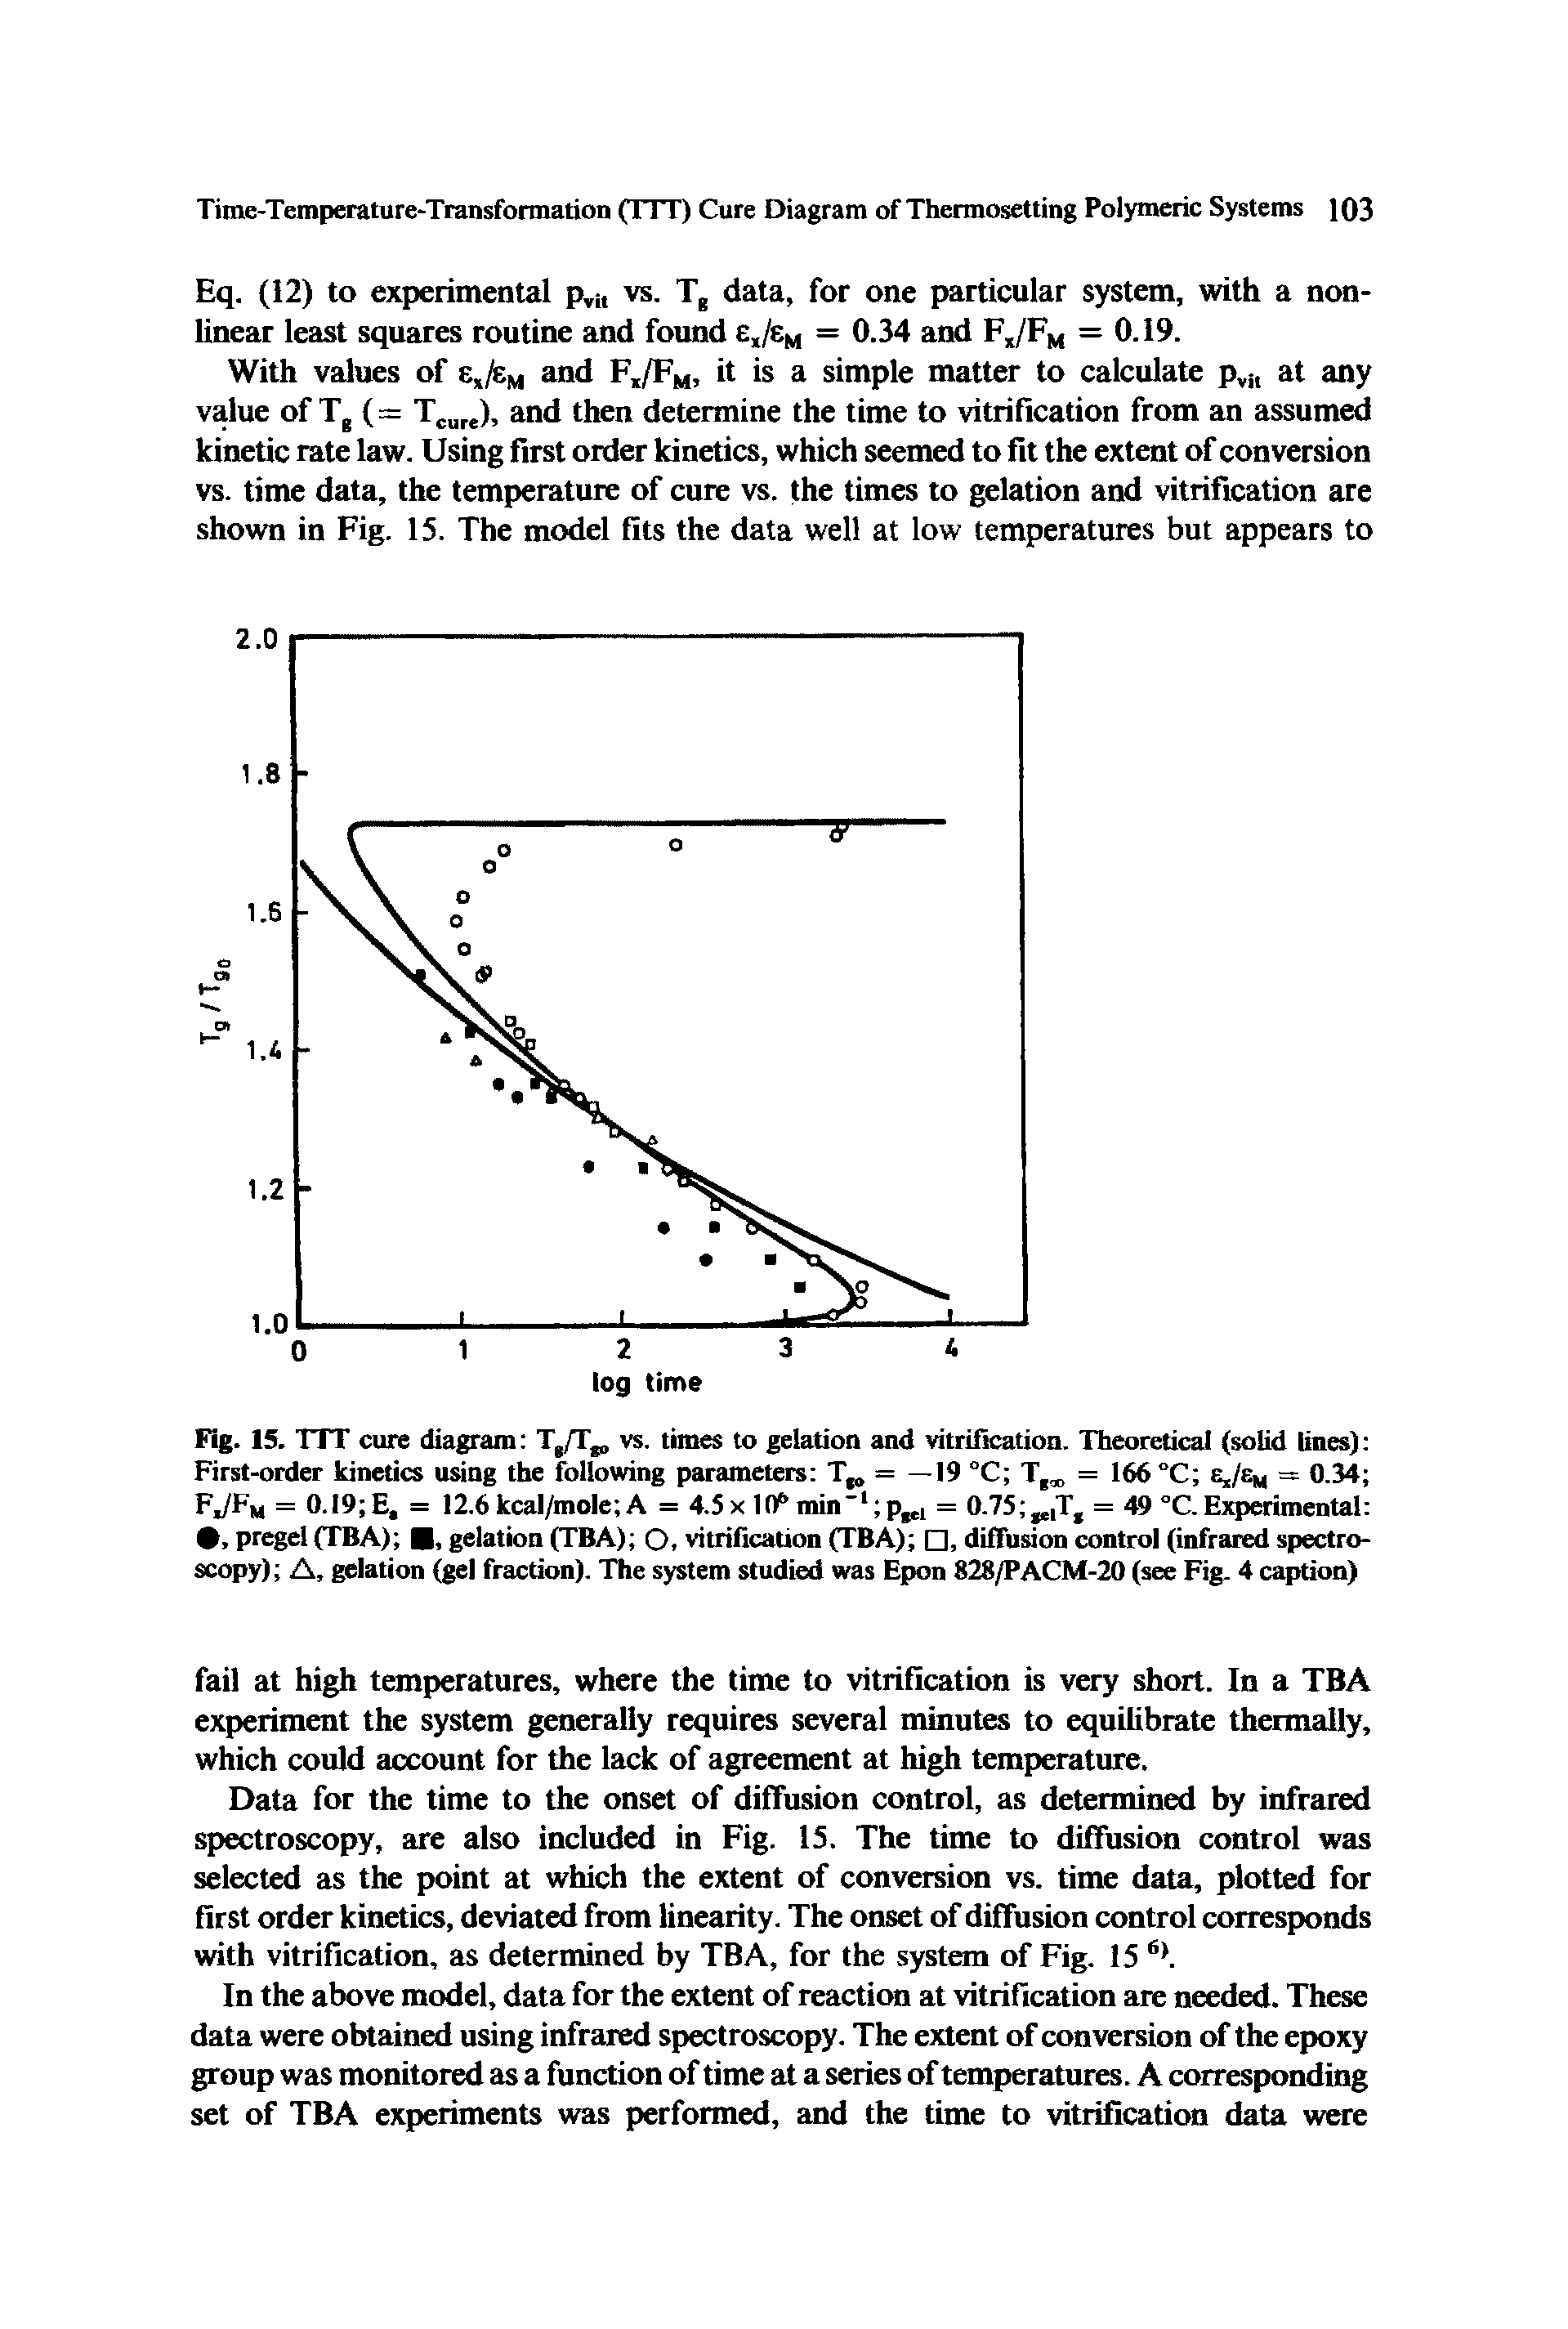 Fig. 15. TTT cure diagram TJT vs. times to gelation and vitrification. Theoretical (solid lines) First-order kinetics using the following parameters T = —19 °C T, = 166 °C Ej/Em = 0.34 FJPft = 0-19 E, = 12.6 kcal/mole A = 4.5x 10 min" pgy, = 0.75 g,Tg = 49 °C. Experimental , pregel (TBA) , gelation (TBA) Q, vitrification (TBA) , diffusion control (infra spectroscopy) A, gelation (gel fraction). The system studied was Epon 828/PACM-20 (see Fig. 4 caption)...